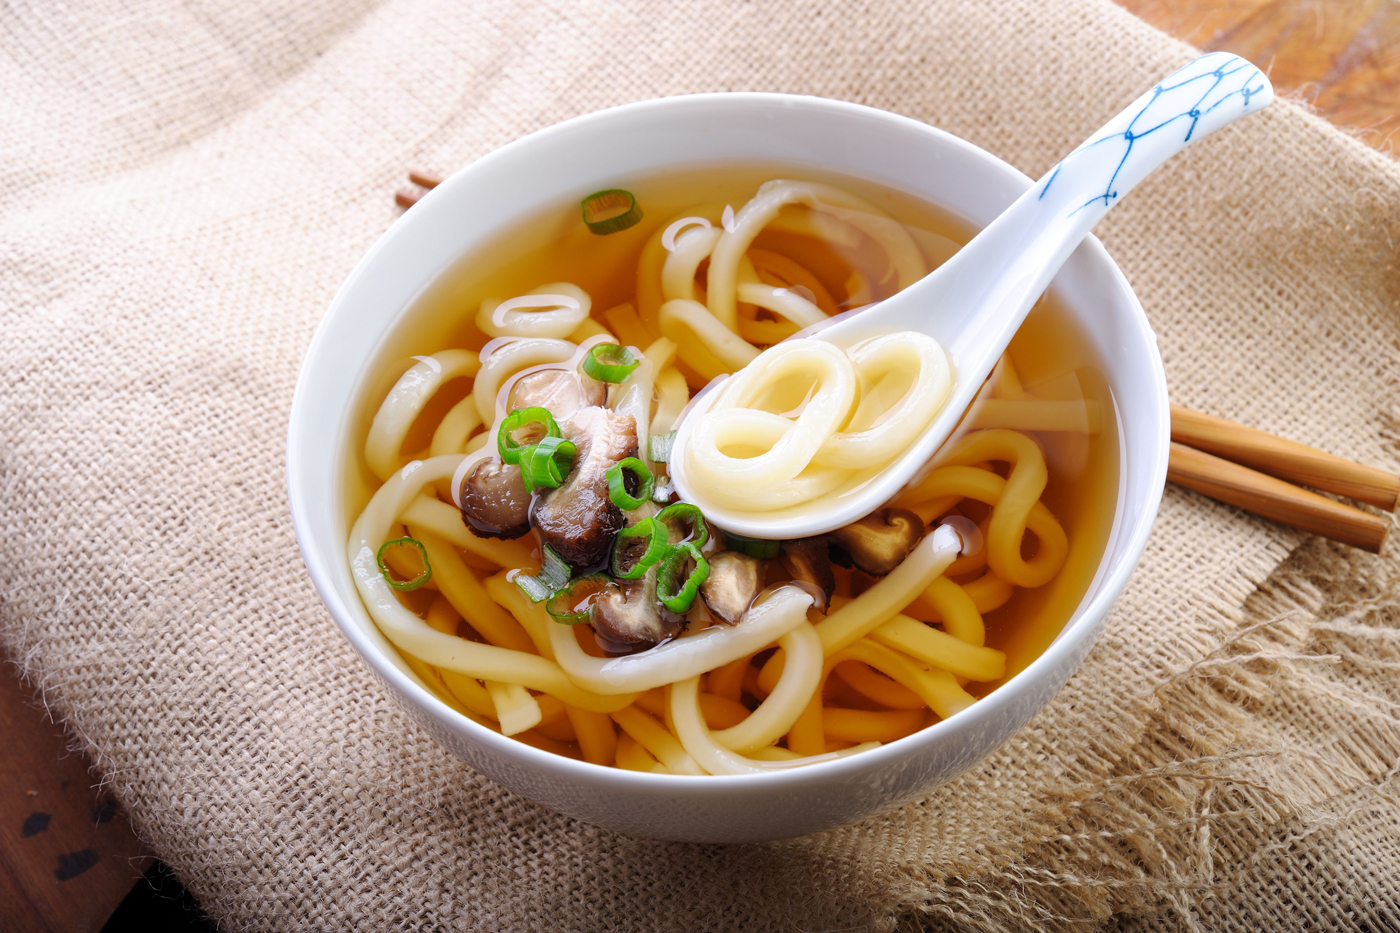 VEGETABLES UDON IN DASHI BROTH